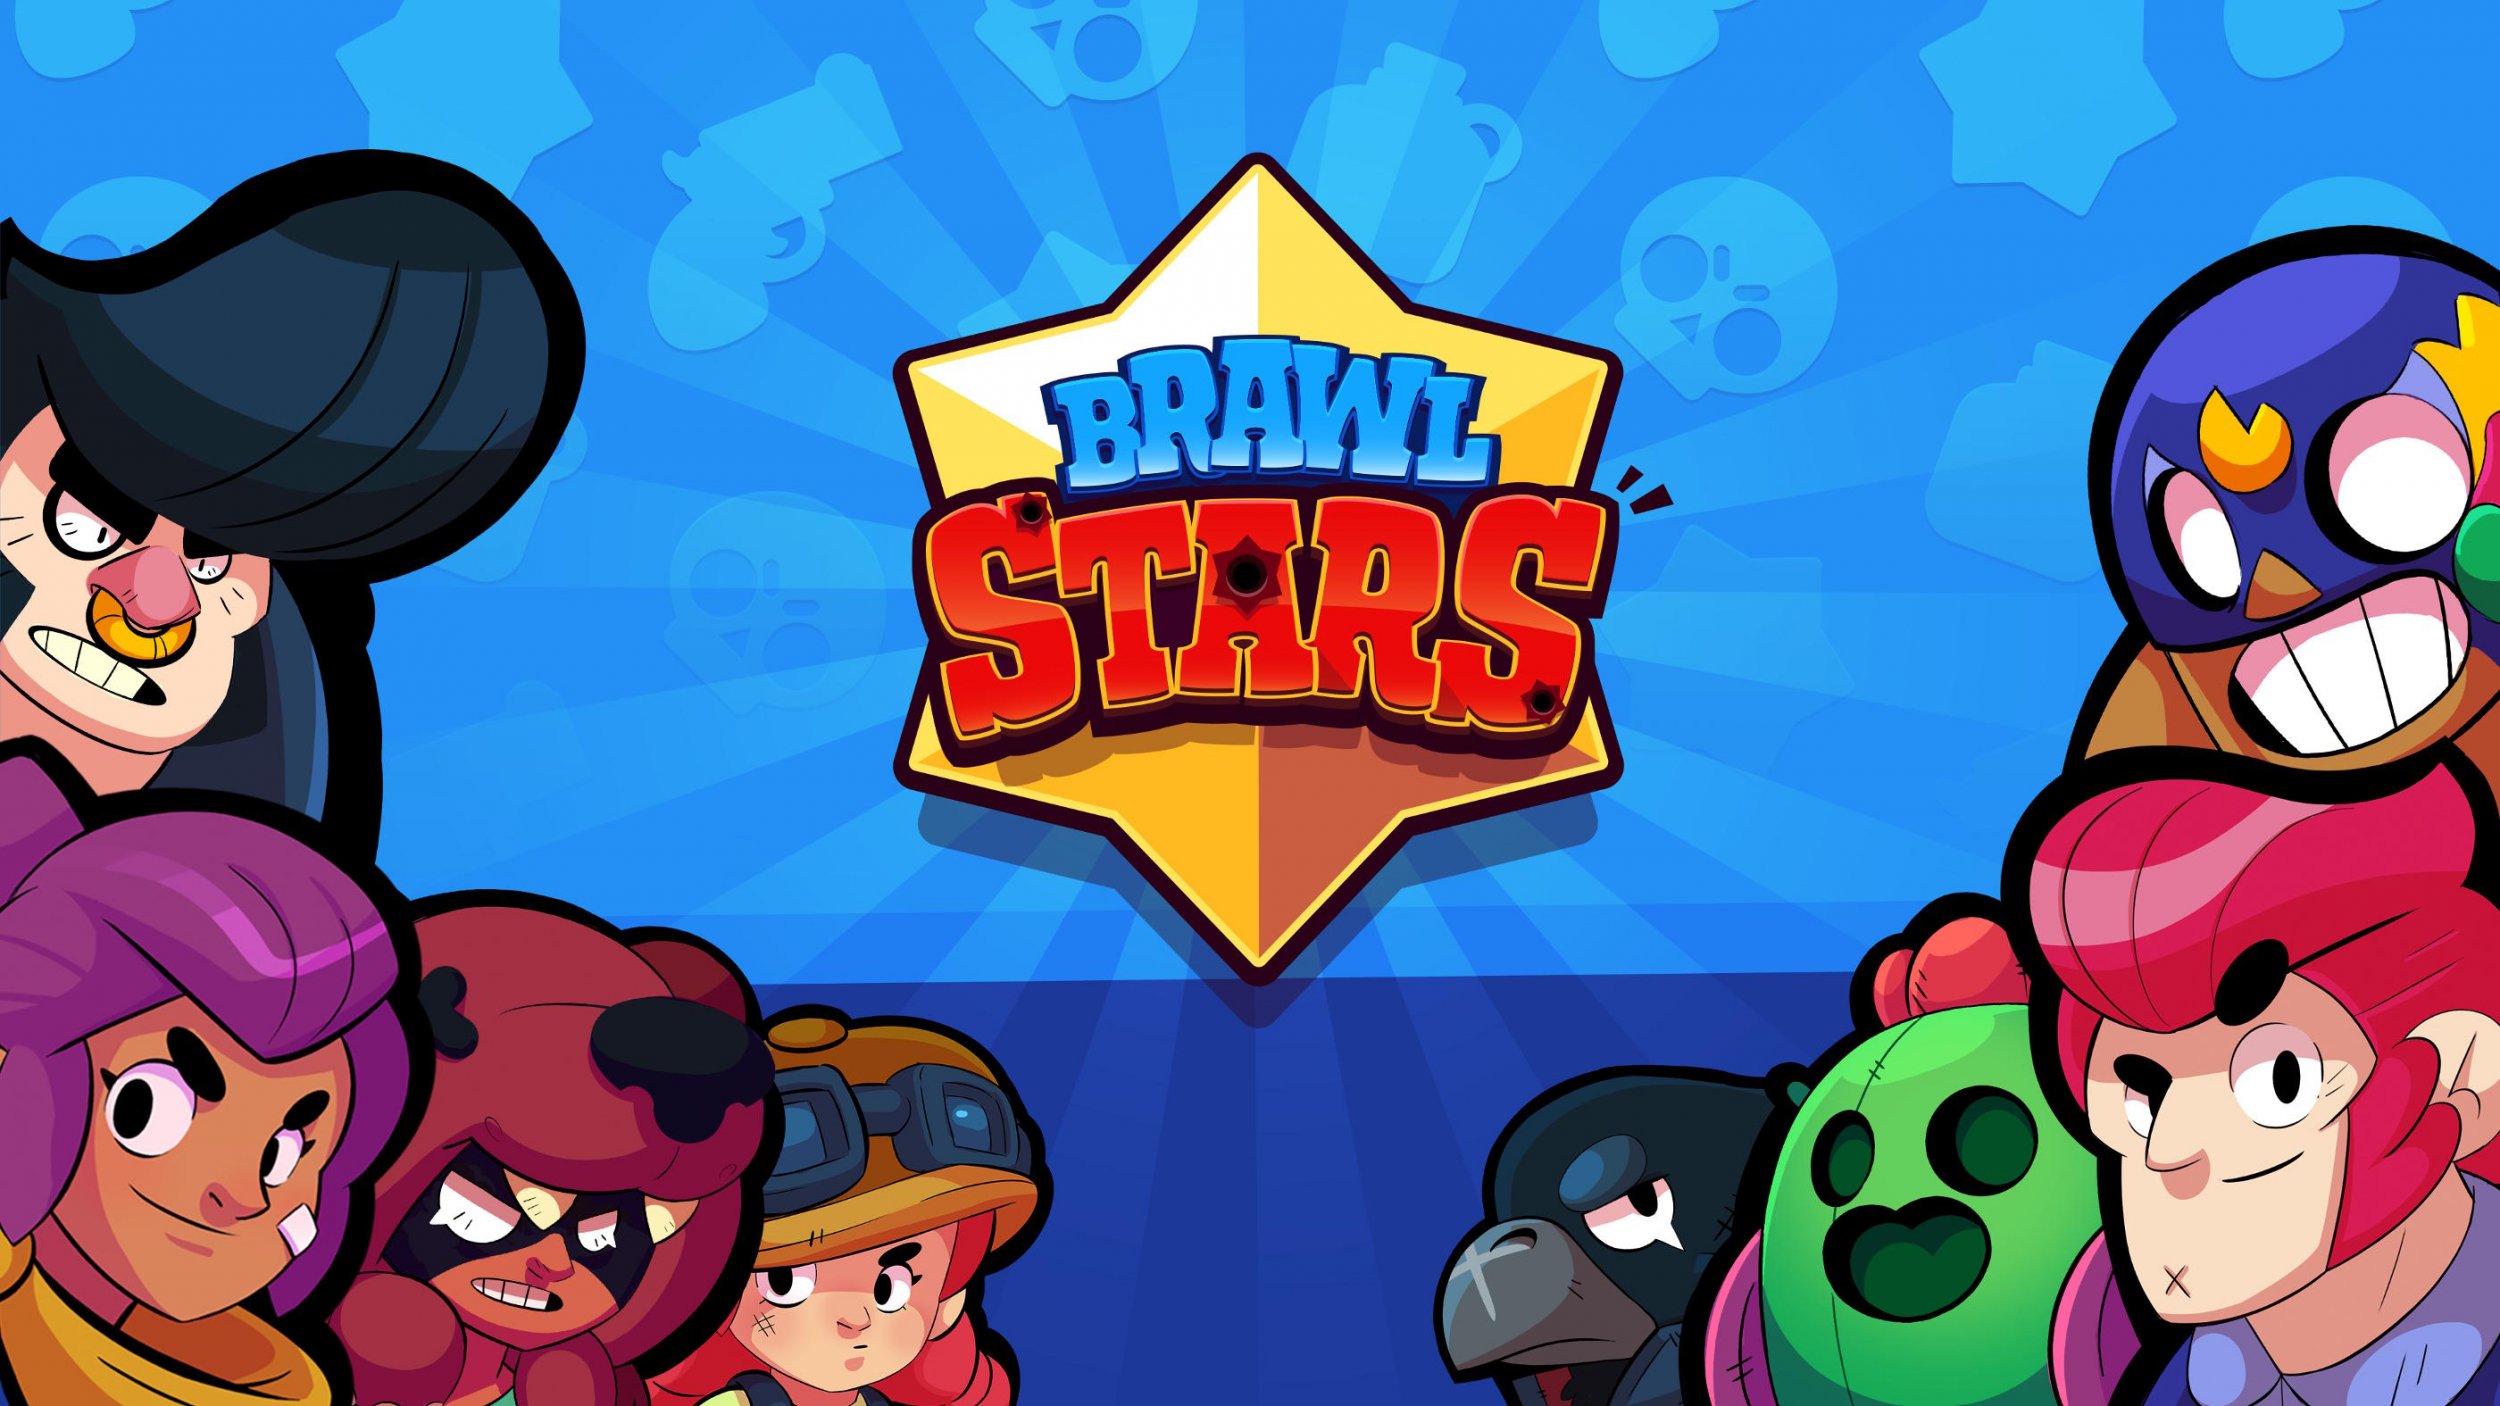 Brawl Stars Update New Upgrade System Landscape Mode And More - brawl stars android date reddit